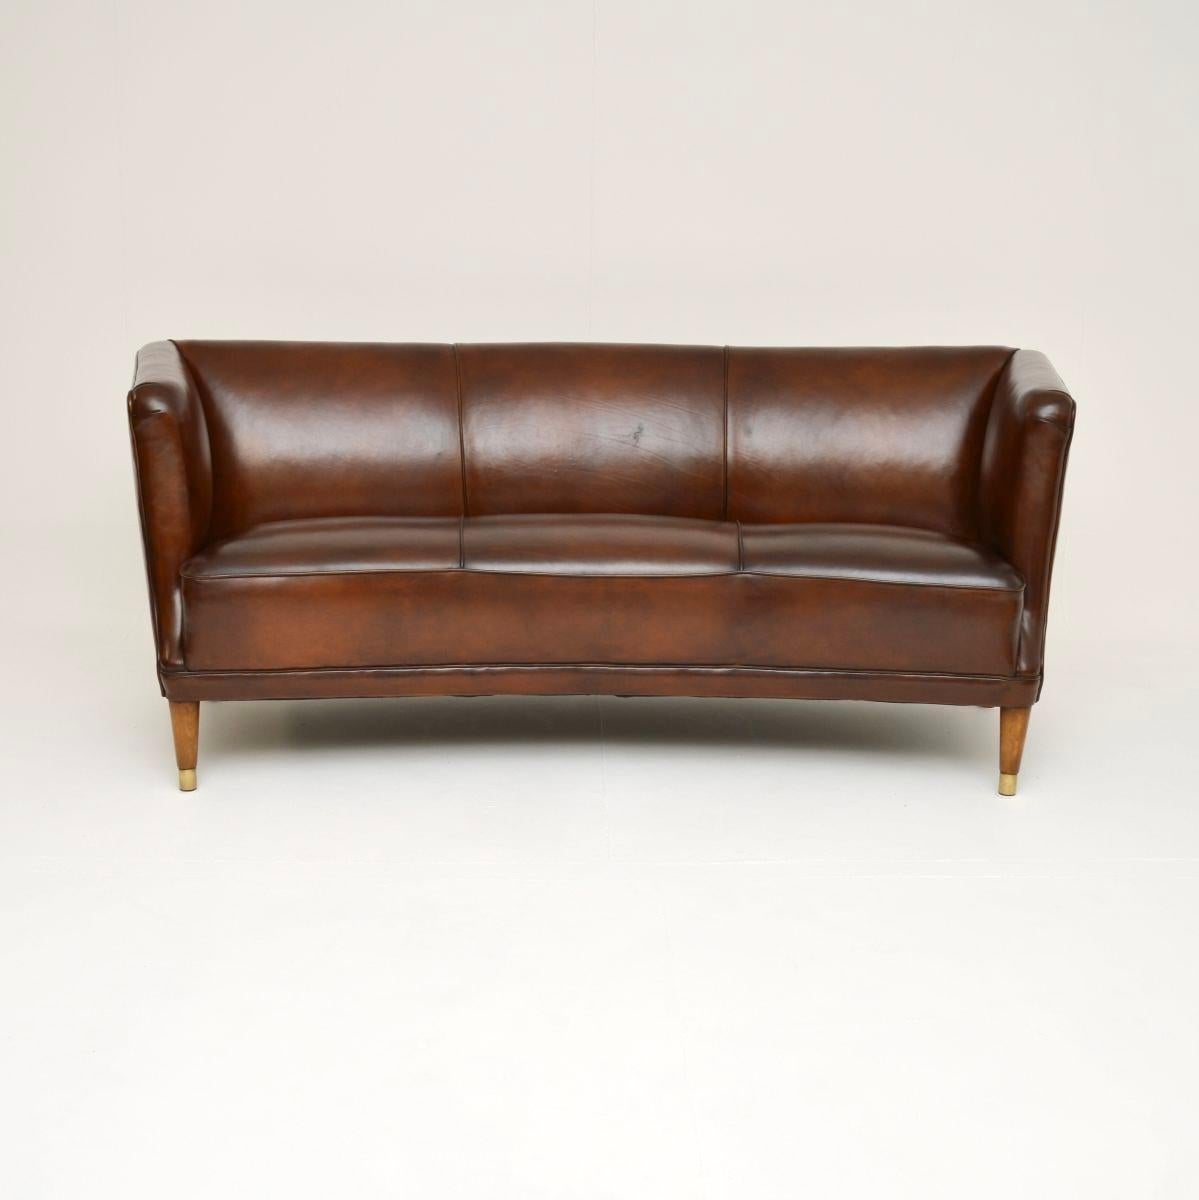 An absolutely stunning and extremely well made vintage Danish cabinetmaker leather sofa. This was recently imported from Denmark, it dates from the 1950’s.

The quality is outstanding, this is a very useful size and is extremely comfortable. The